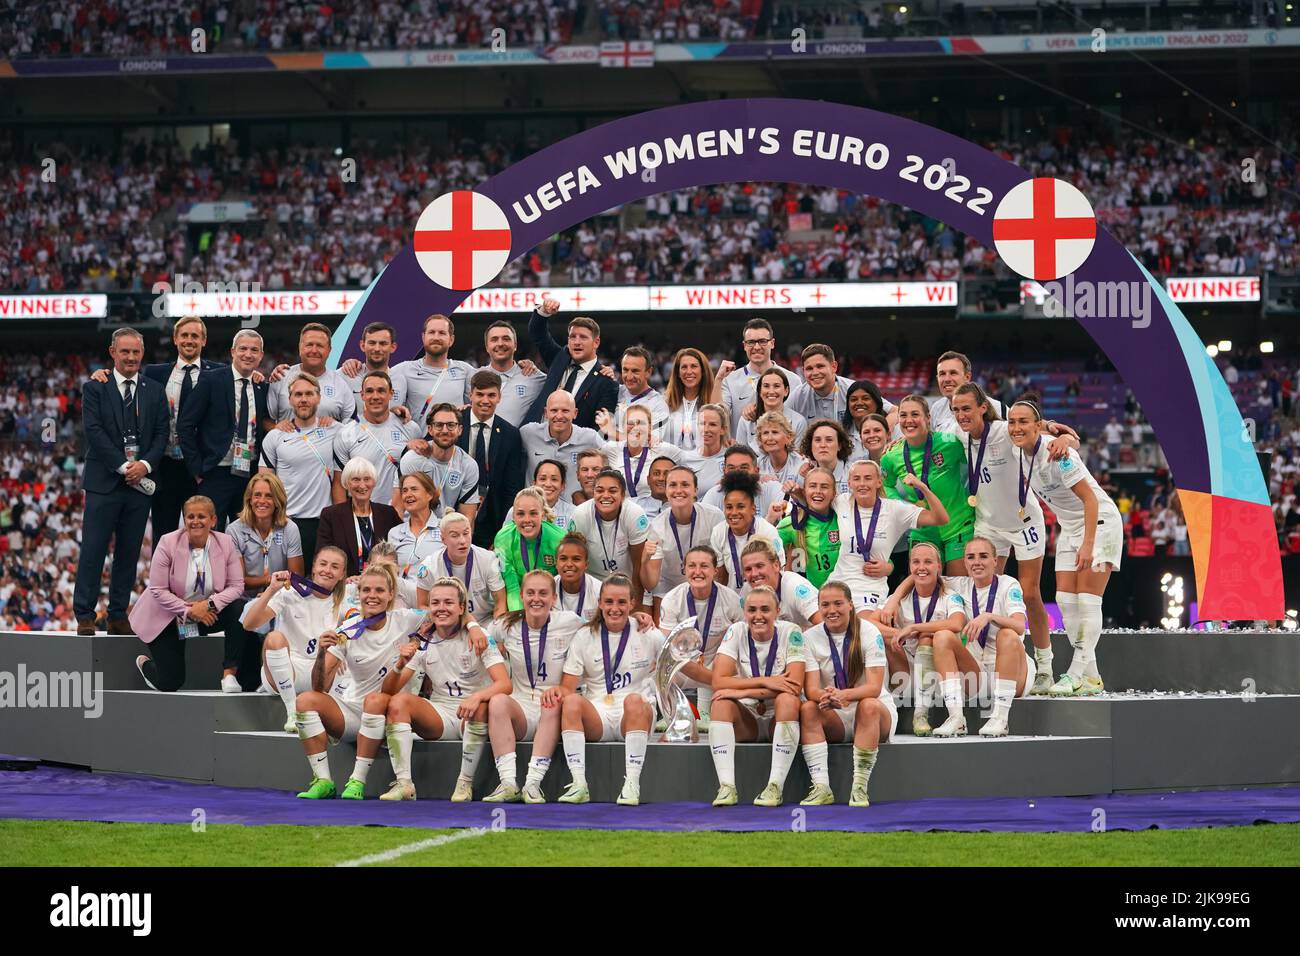 Westfield London set to show every strike, save and celebration of the  Women's World Cup Final - London Post